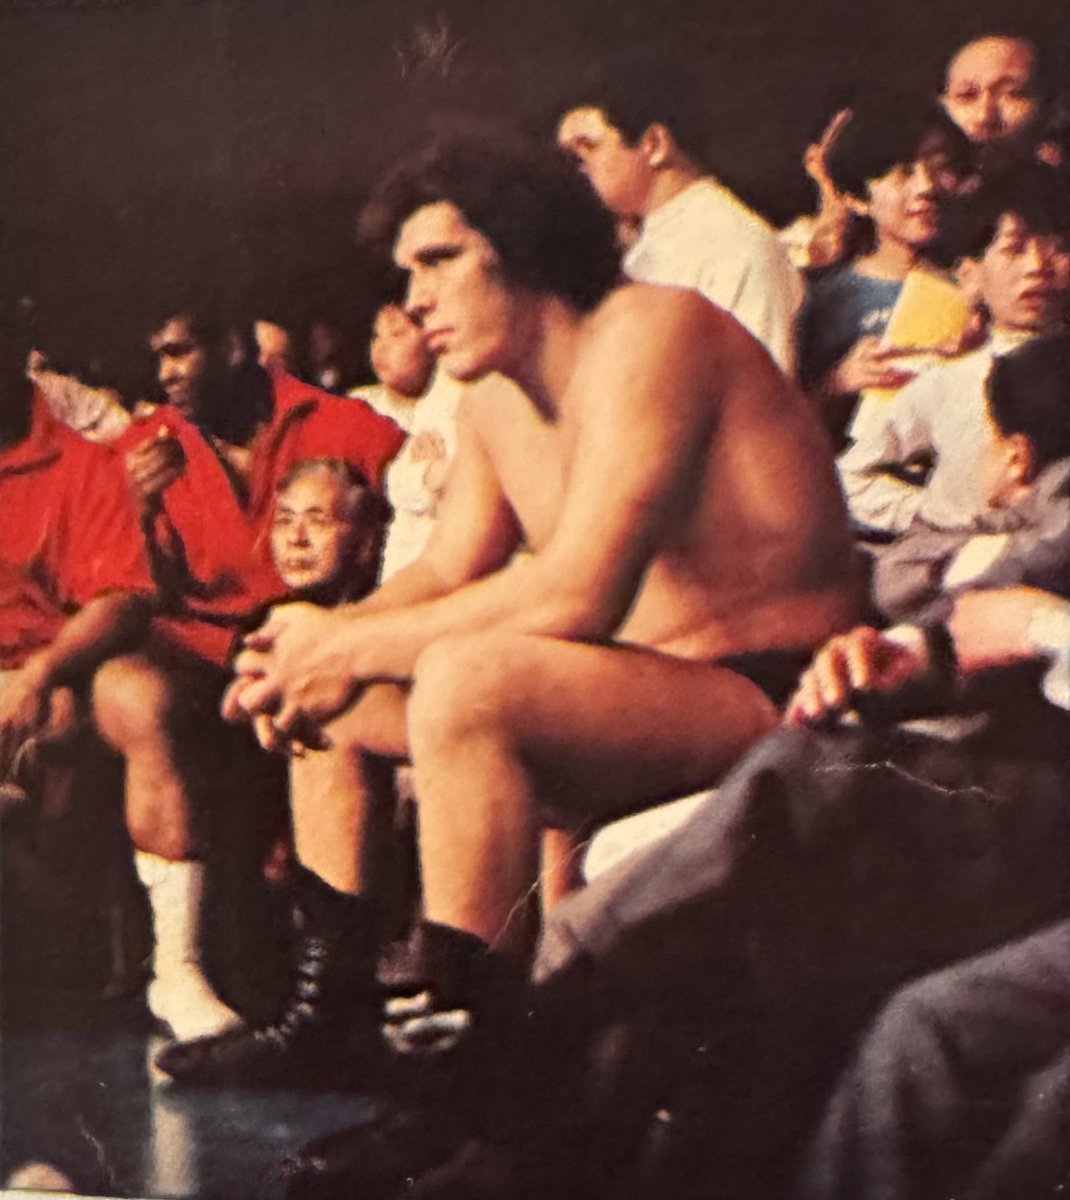 Some photos of “Monster Rousimoff” as he sits front row watching Karl Gotch vs Billy Robinson at the 1971 IWE Annual Tournament, followed by him holding his prize for winning the tournament with Karl Gotch